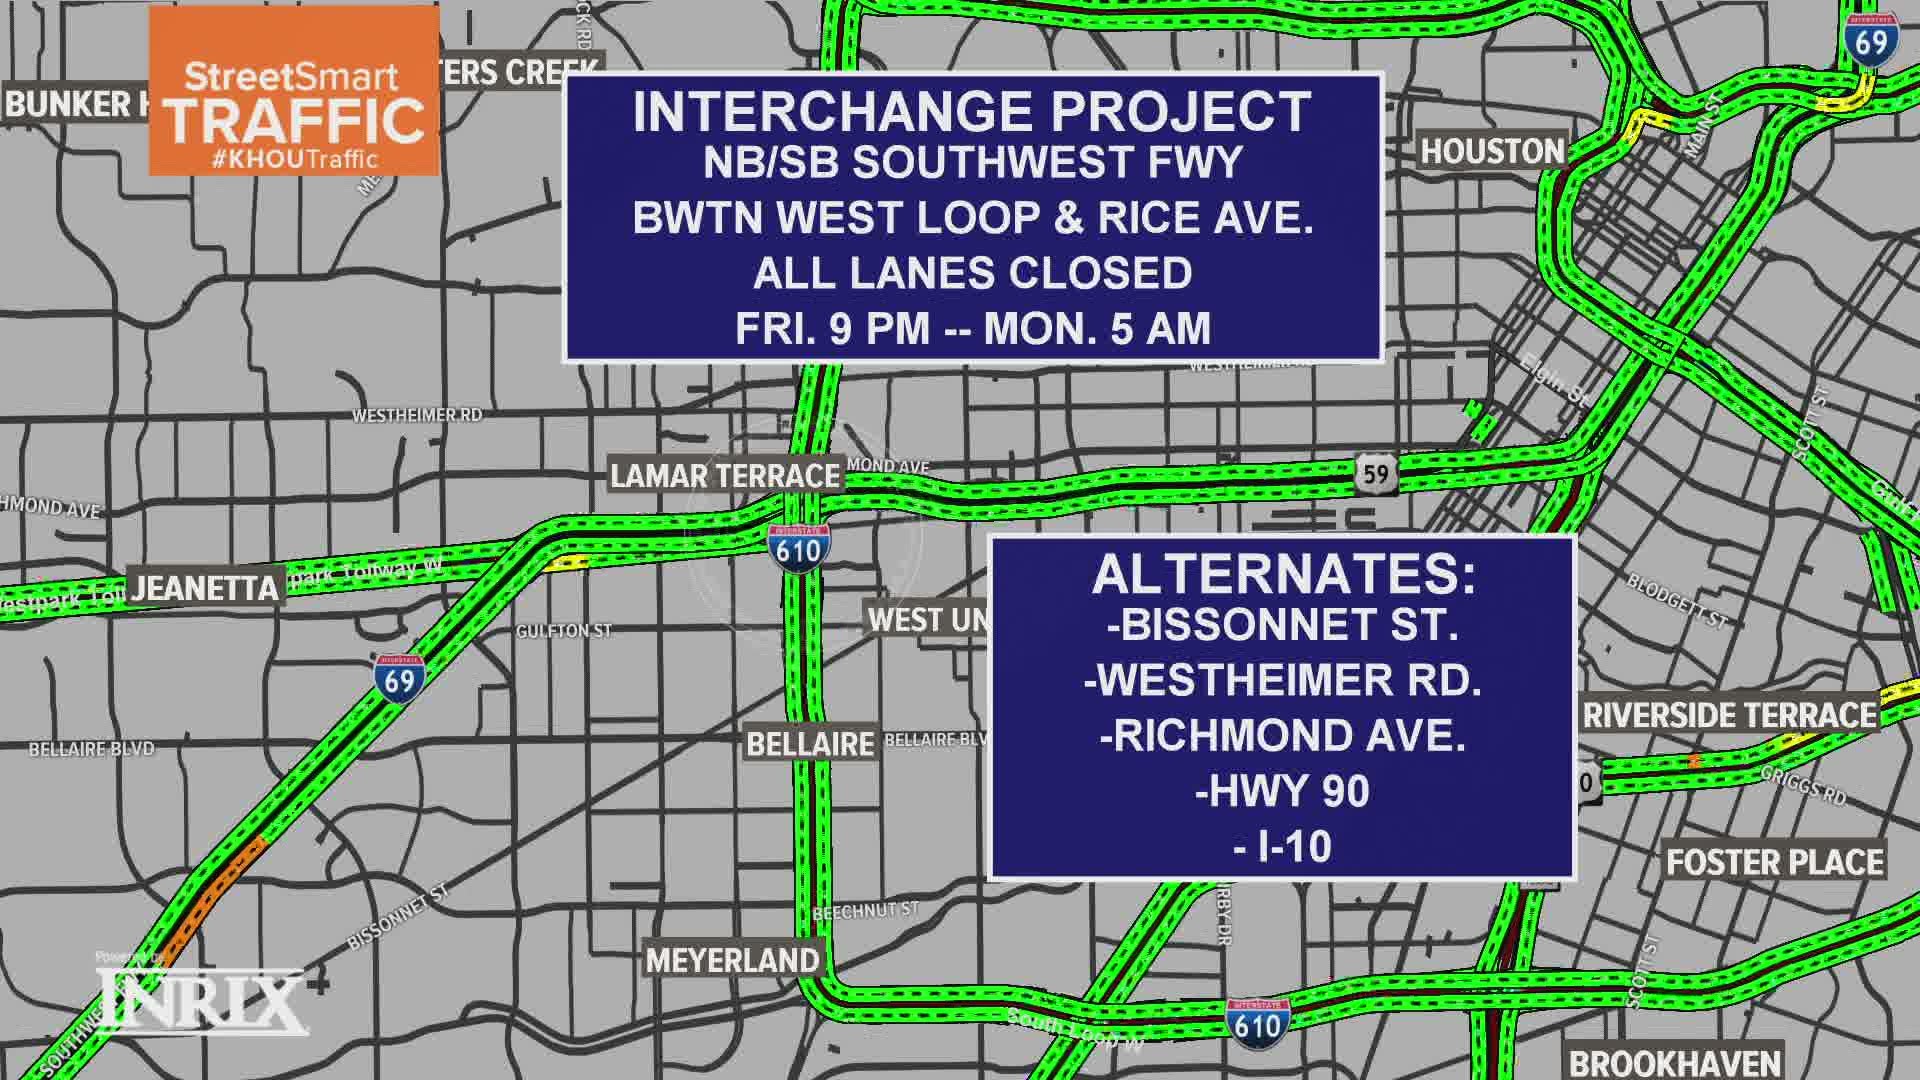 #HTownRush has a look at this weekend's big ramp demolition and freeway closure near the Galleria and Uptown | March 5, 2021